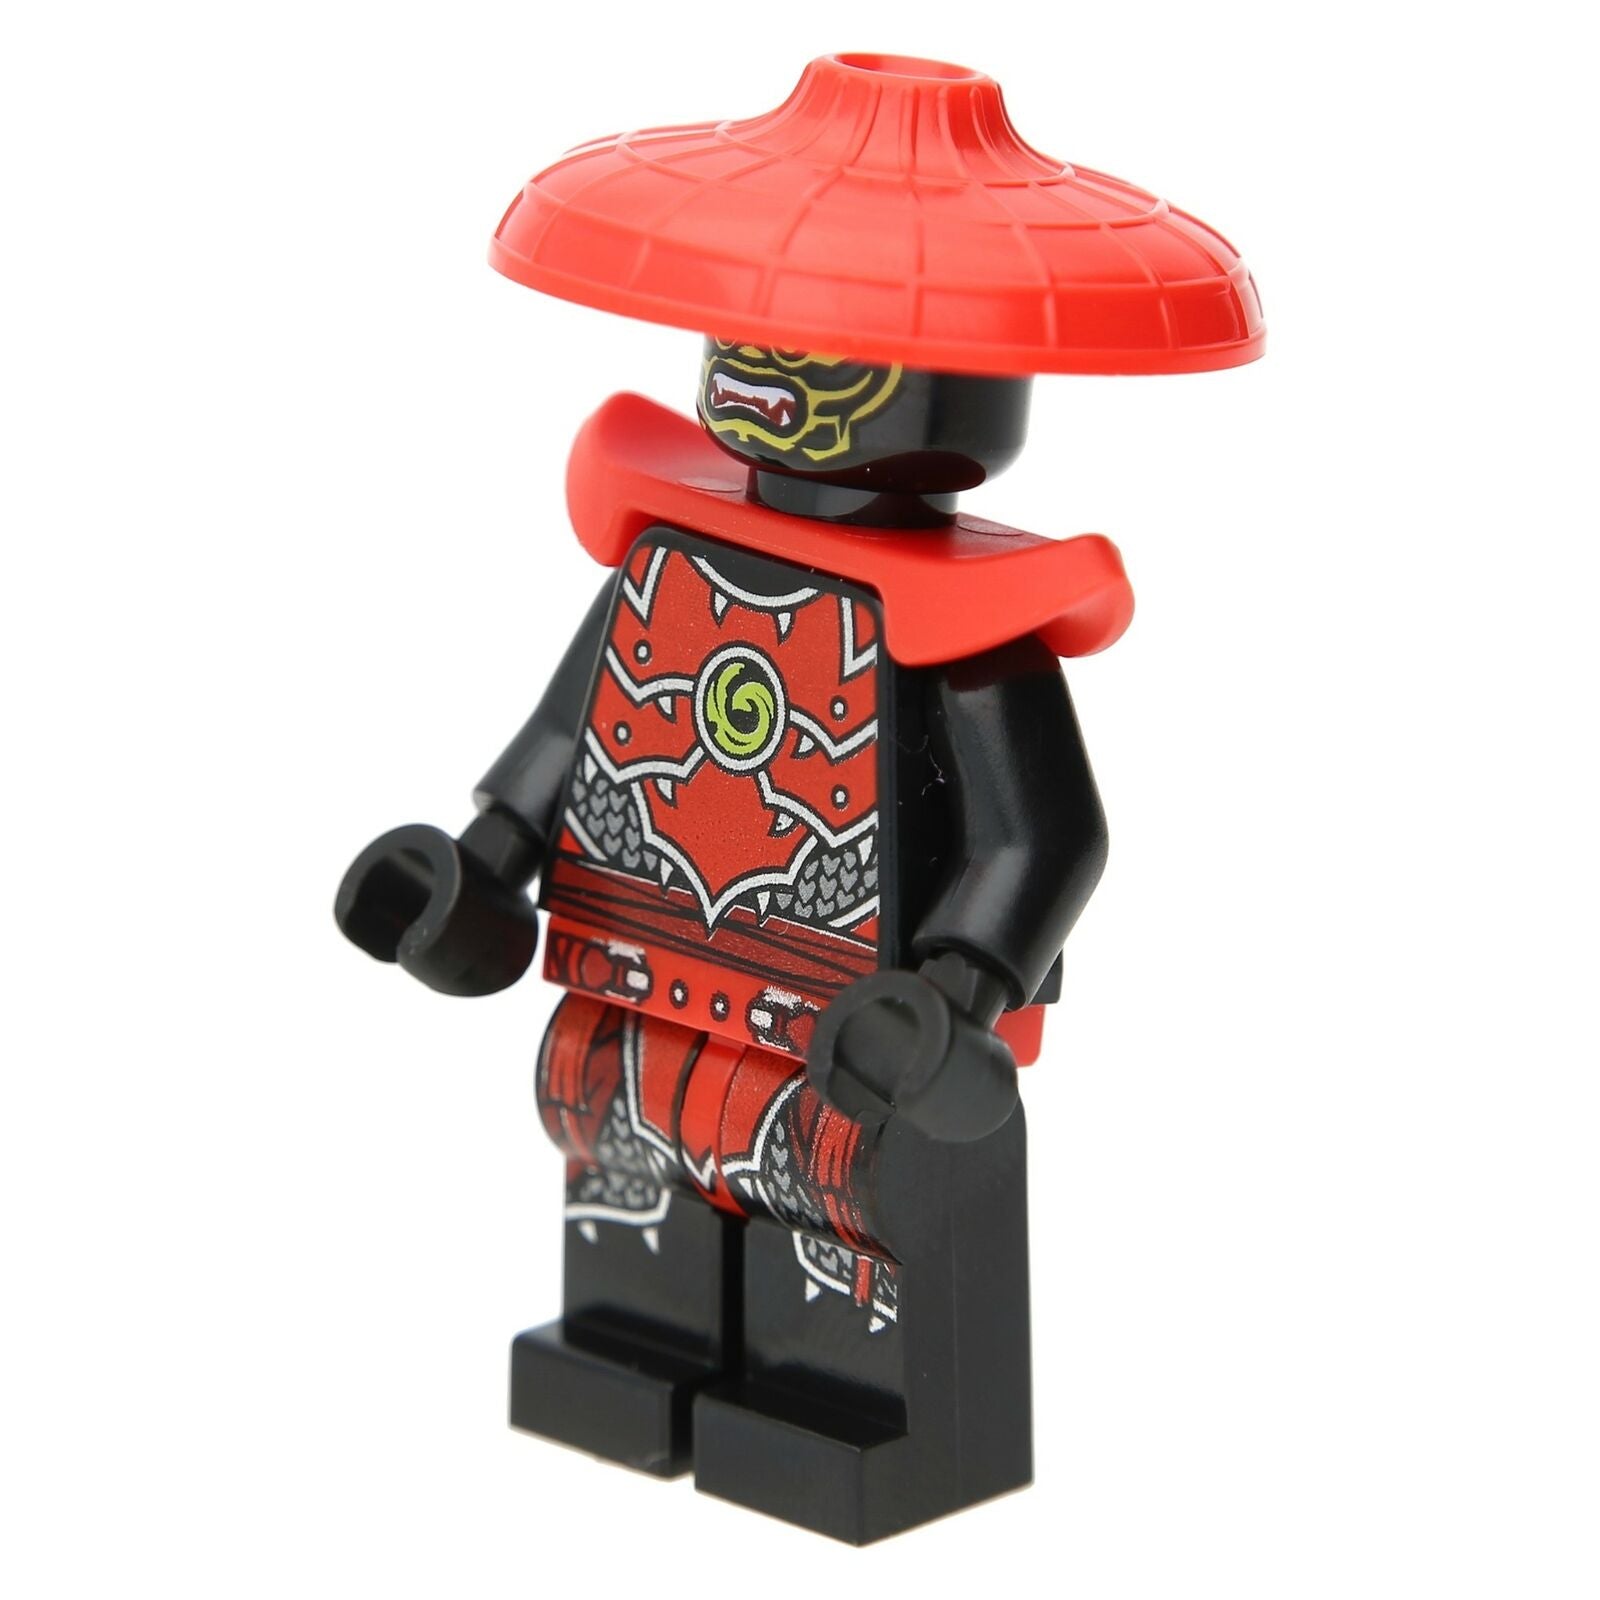 LEGO Ninjago Minifigur - Stone Army scouts with a helmet and shoulder pad